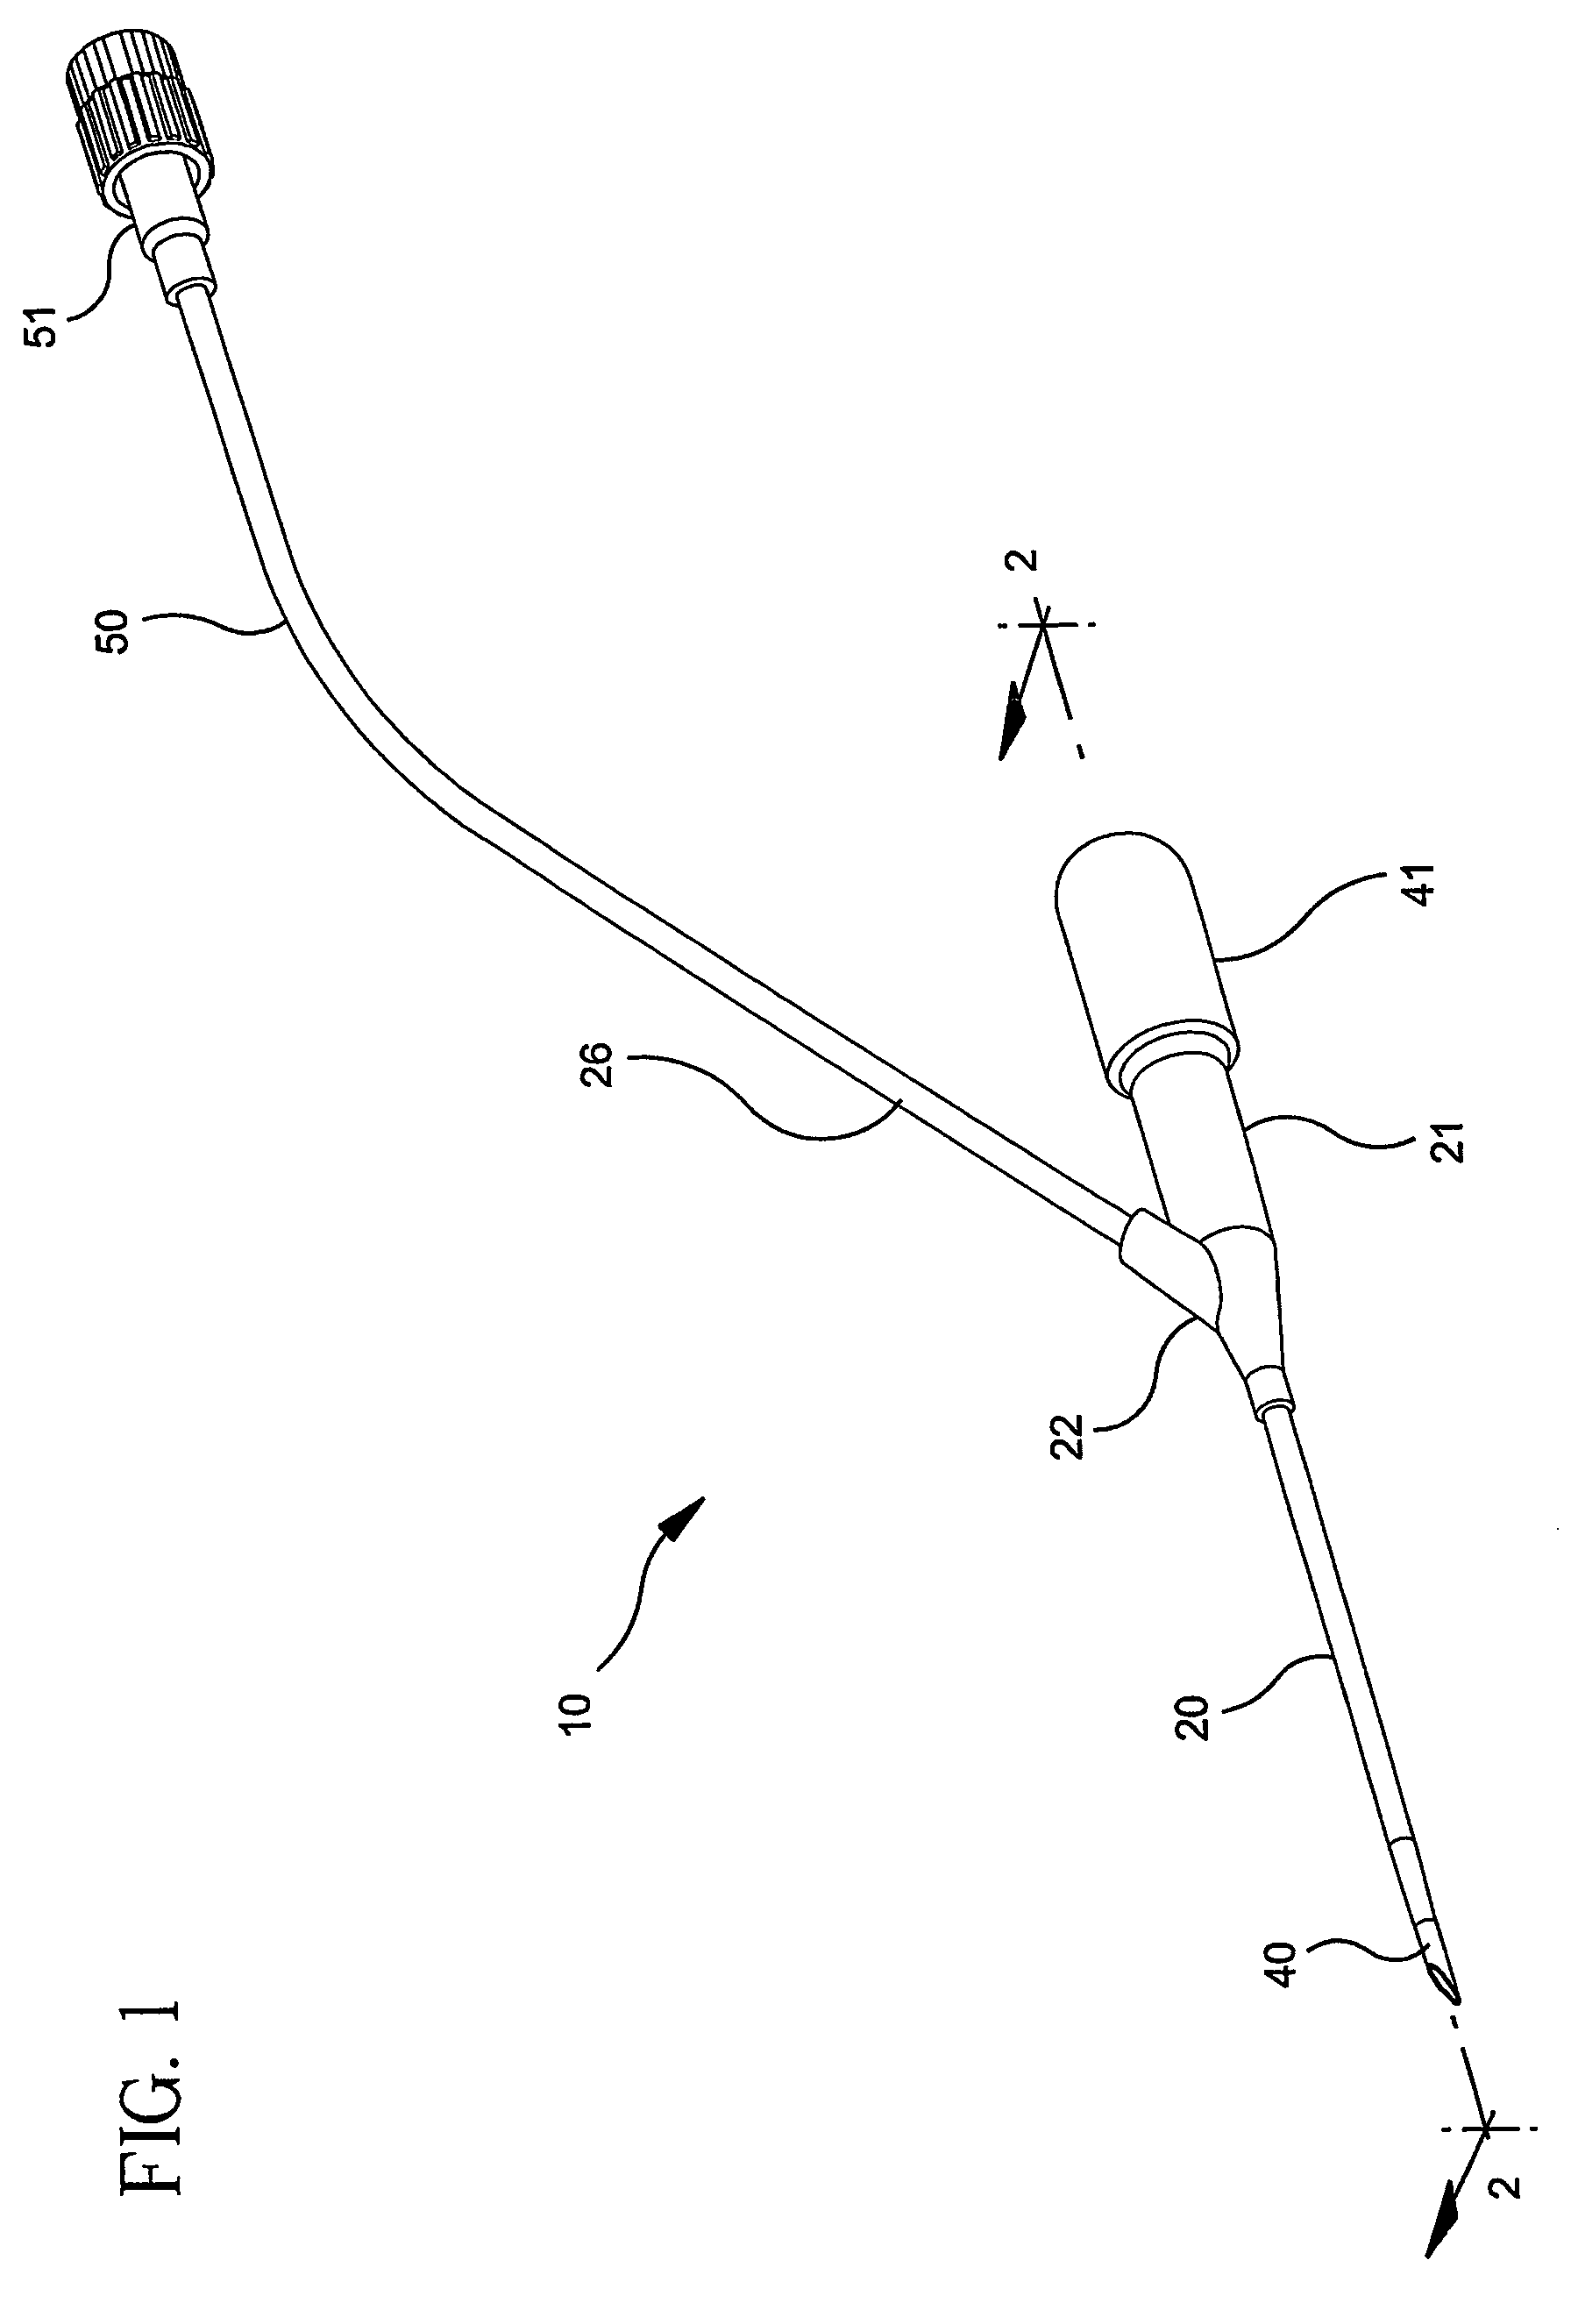 Method of and apparatus for controlling flashback in an introducer needle and catheter assembly